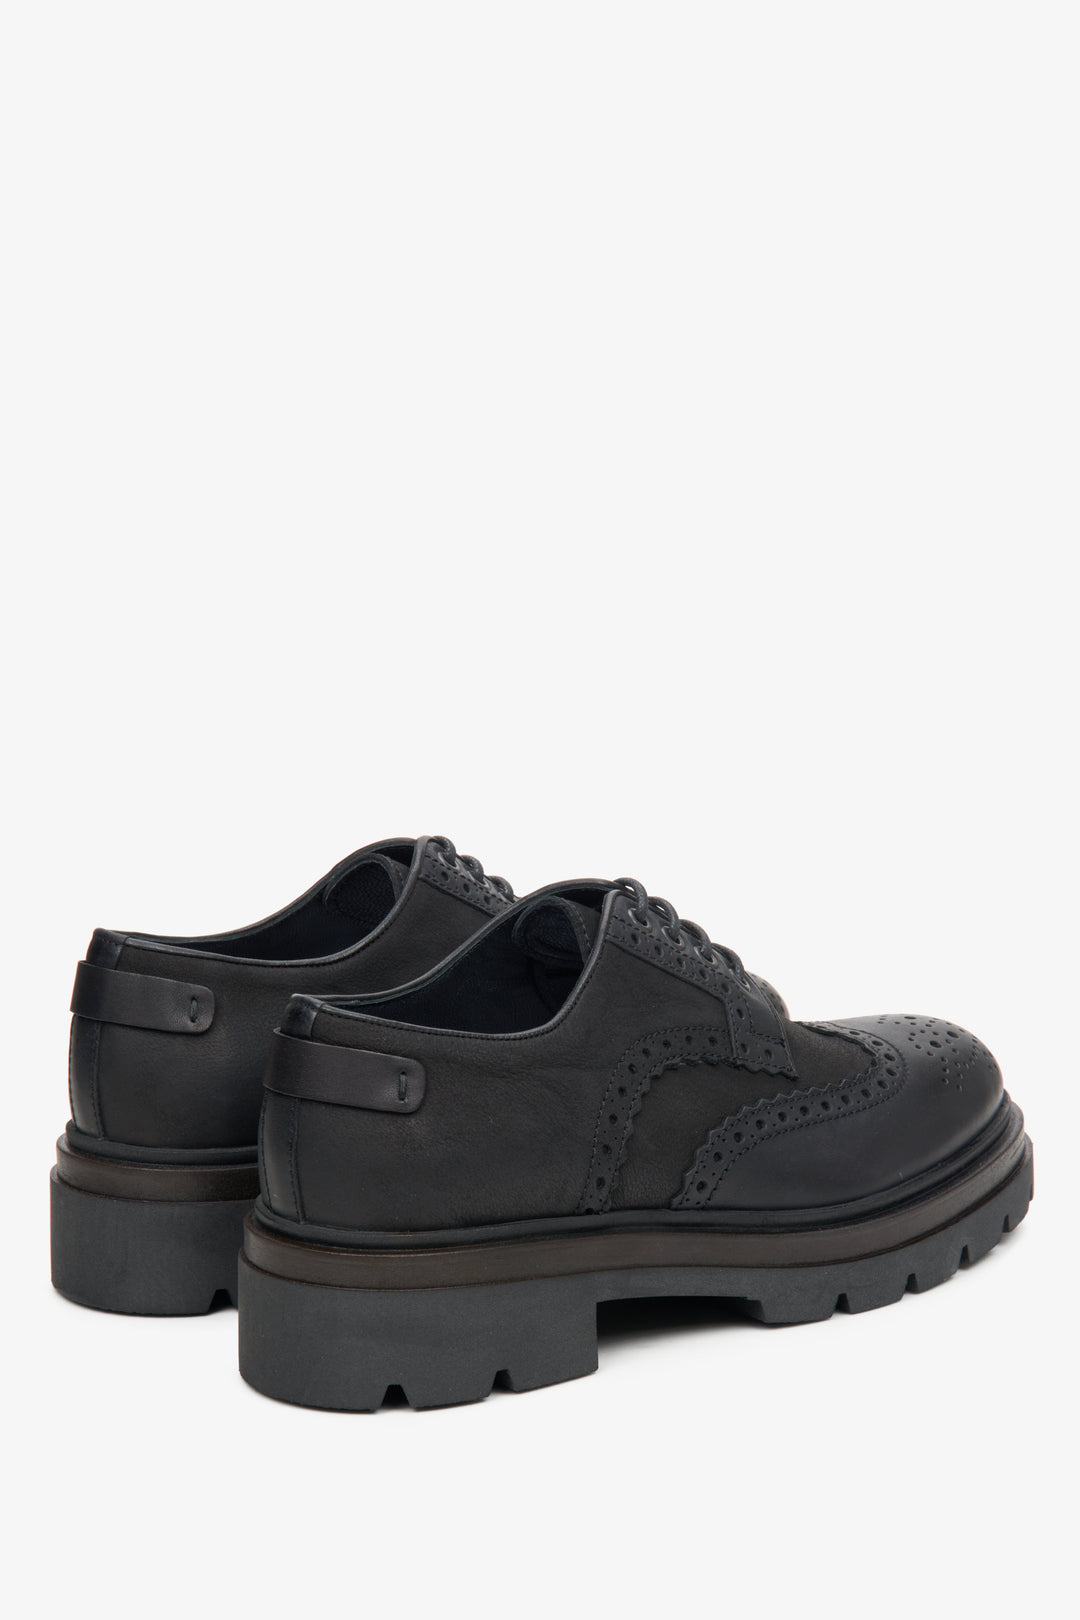 Men's leather black shoes by Estro - close-up on the heel and side stripe.